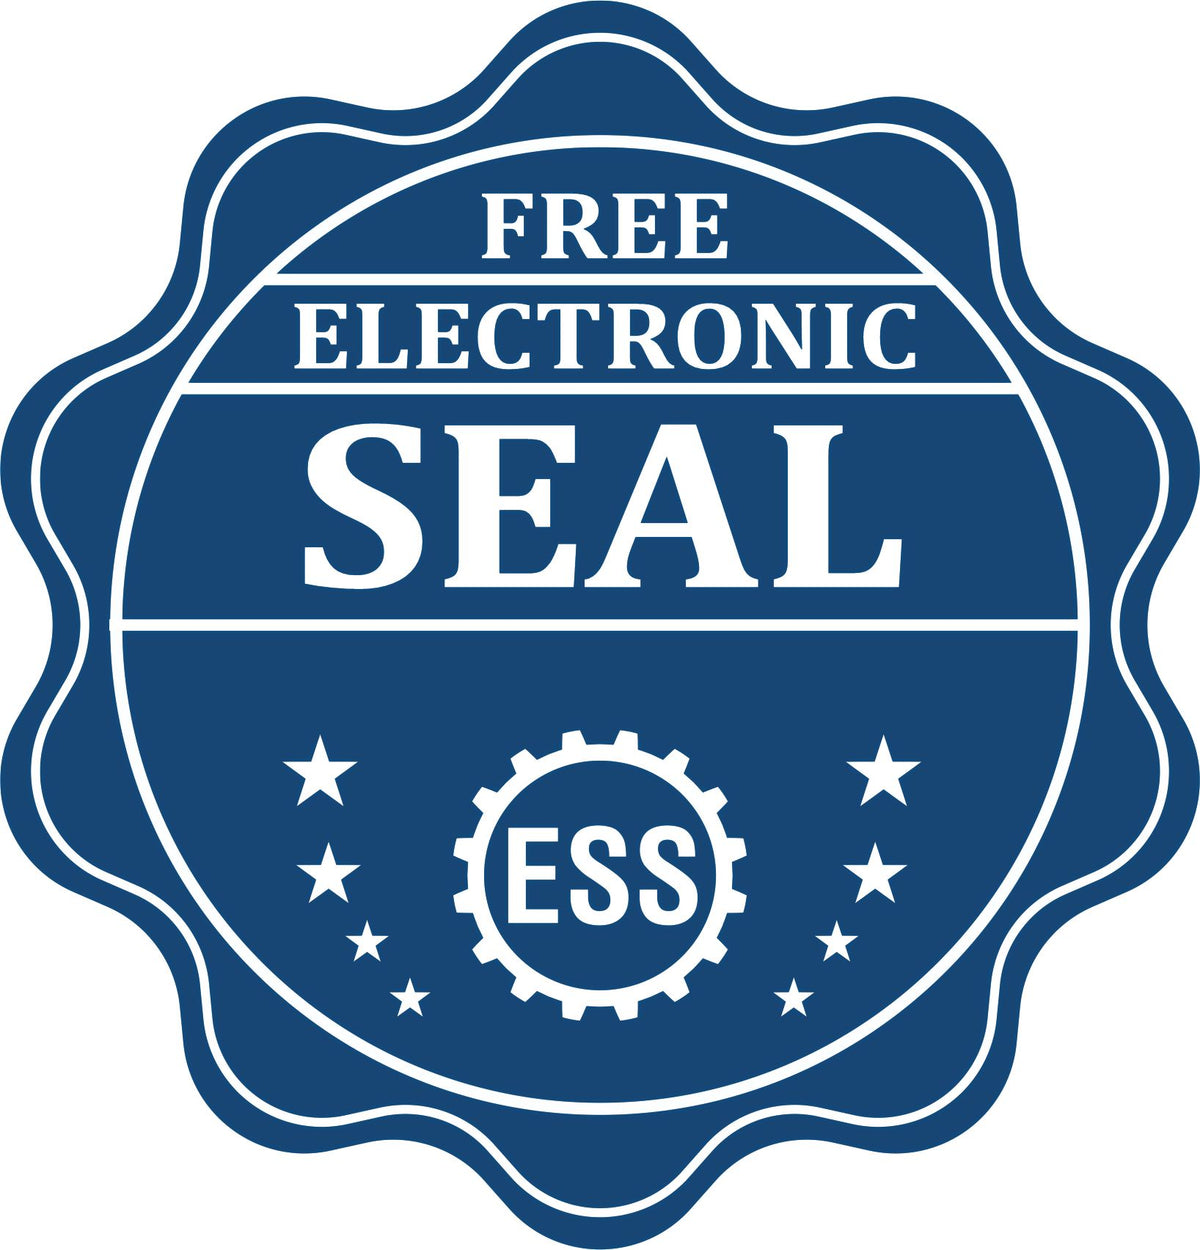 A badge showing a free electronic seal for the Slim Pre-Inked Washington Land Surveyor Seal Stamp with stars and the ESS gear on the emblem.